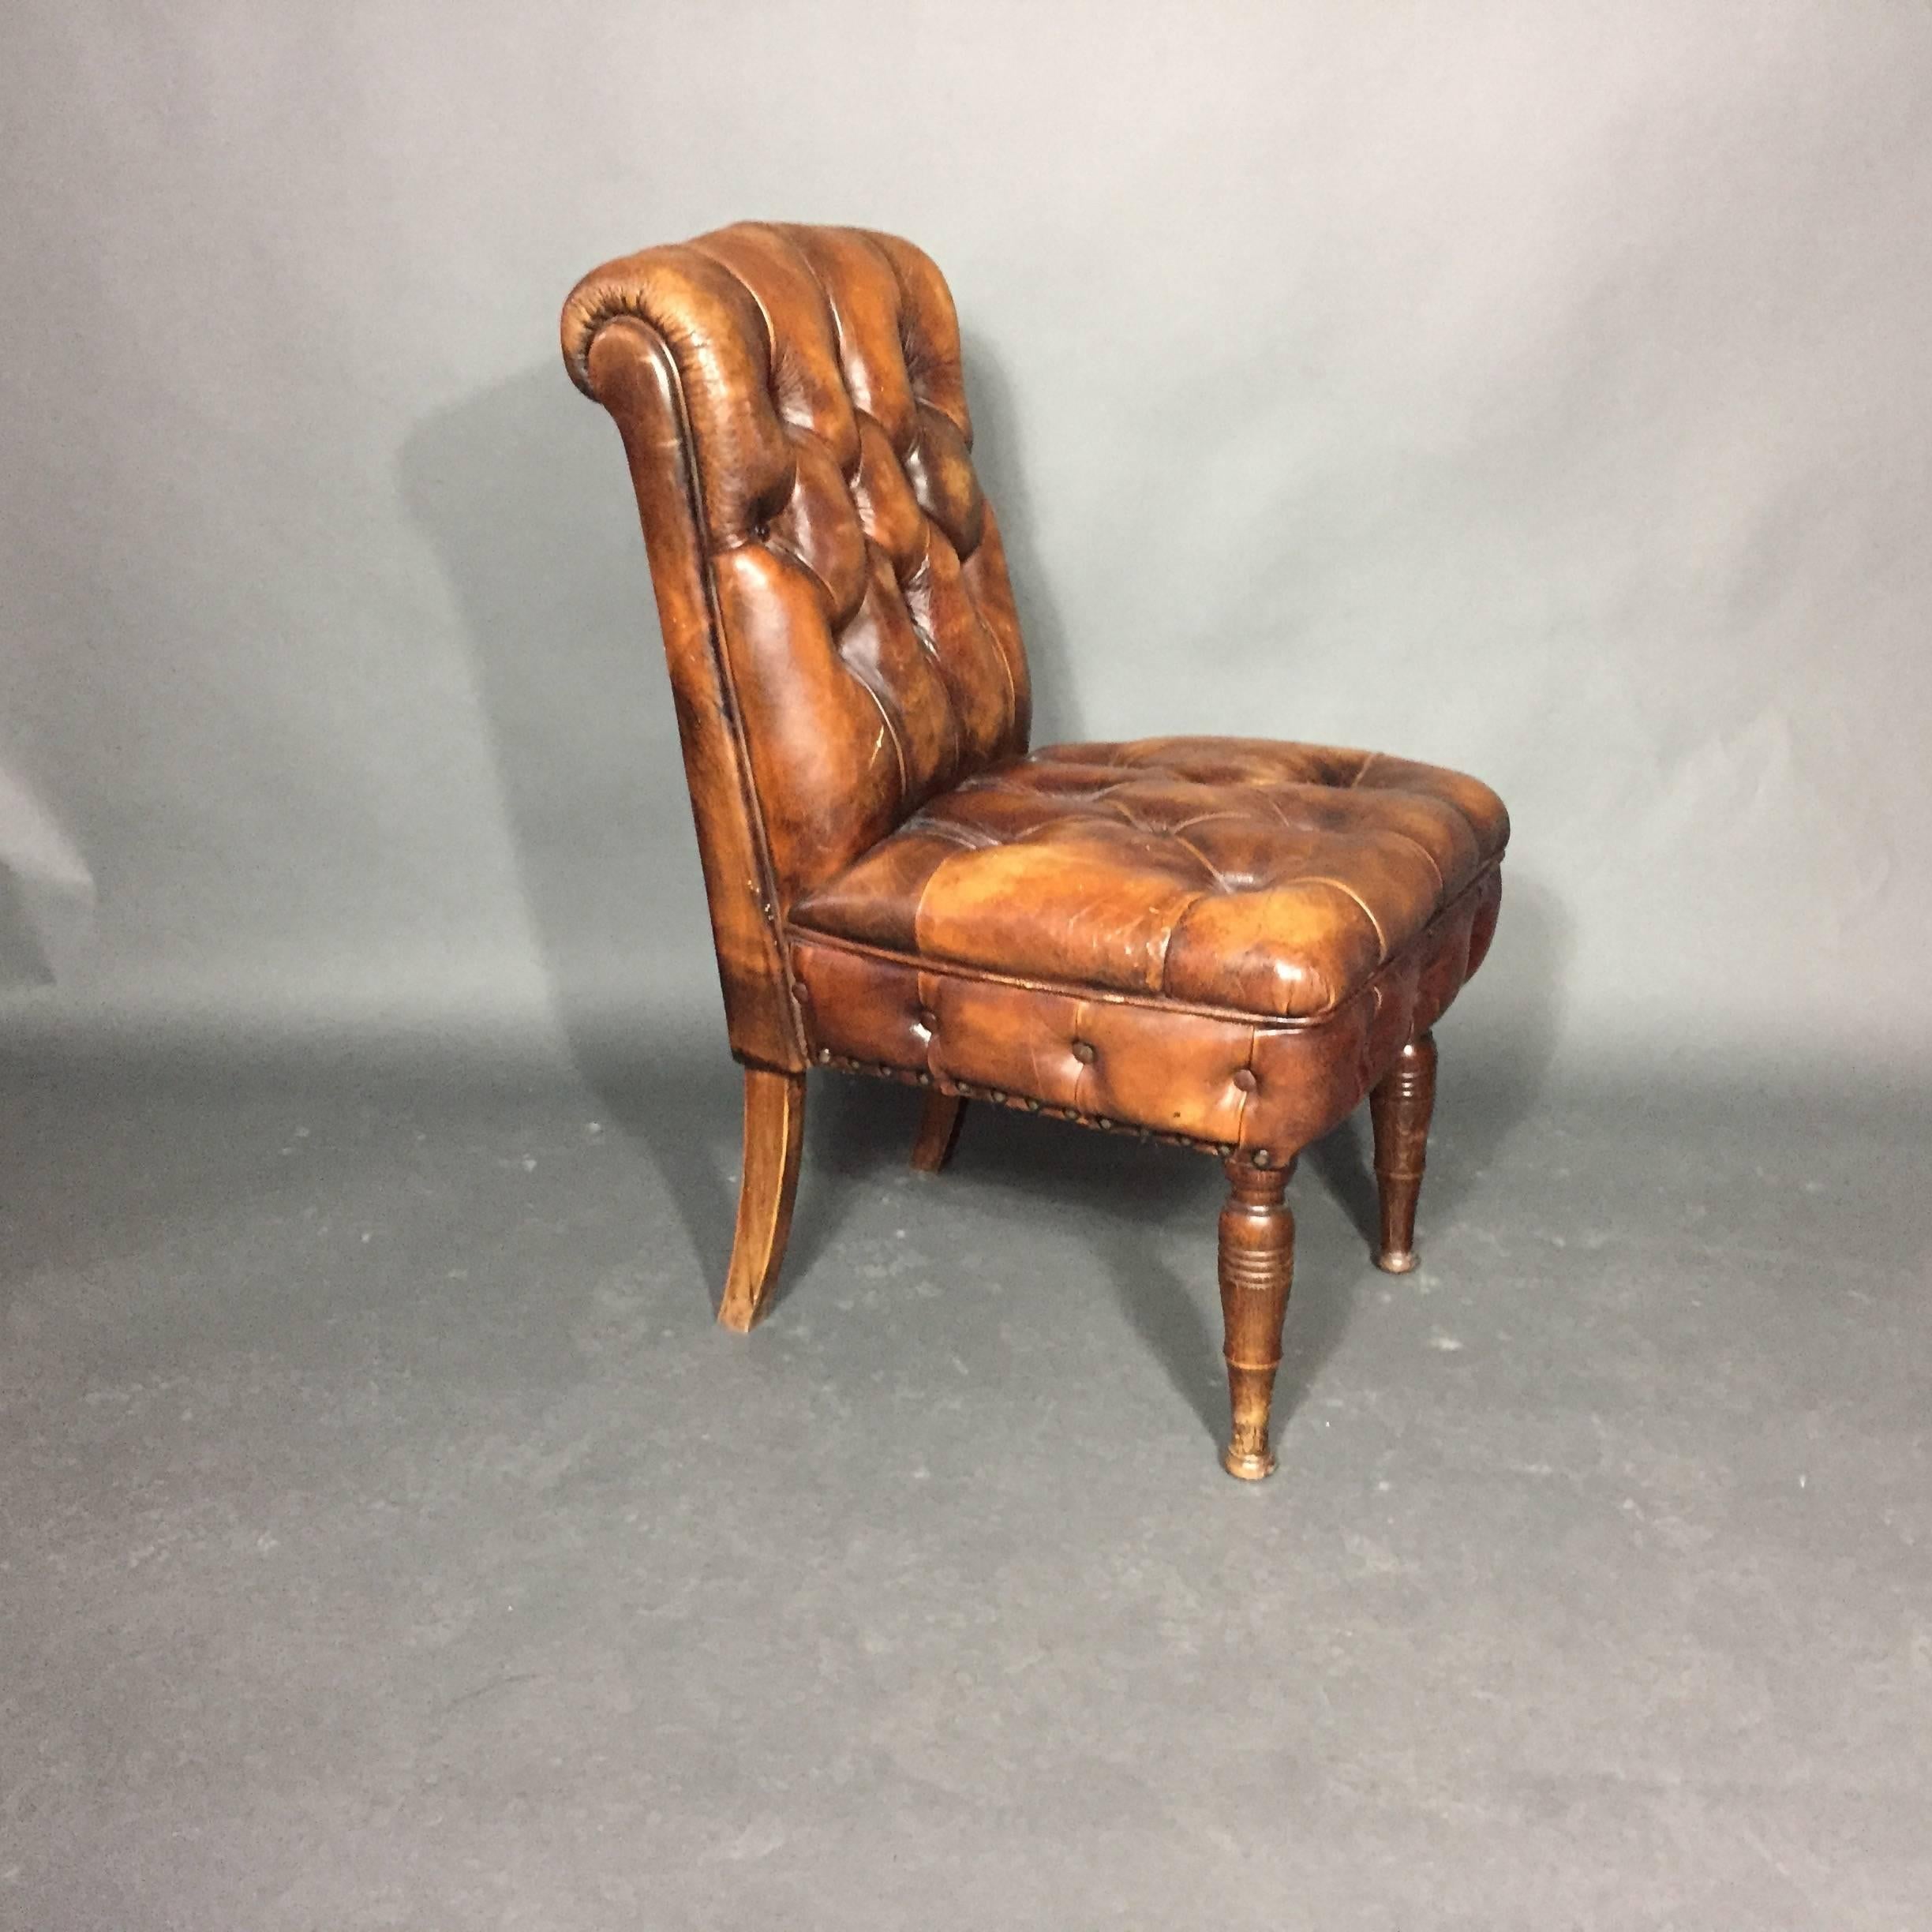 English Chesterfield Slipper Chair, 1920s, Updated Leather 1